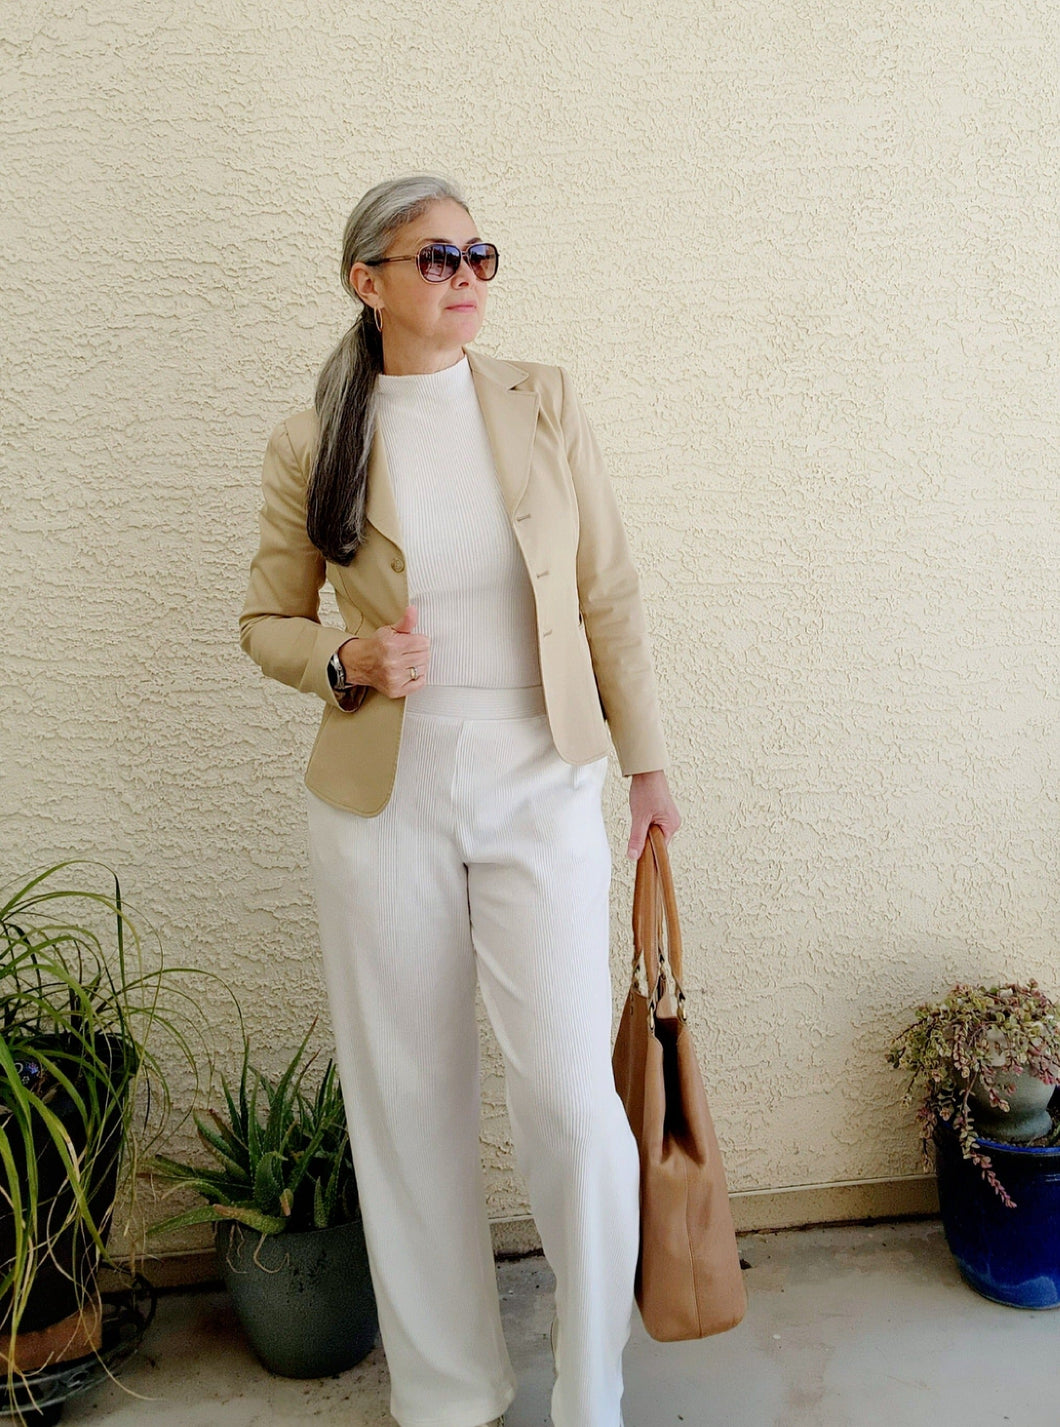 White pant and top styled with a beige jacket, sneakers and leather handbag.  Ethically well-made clothing in Las Vegas NV.